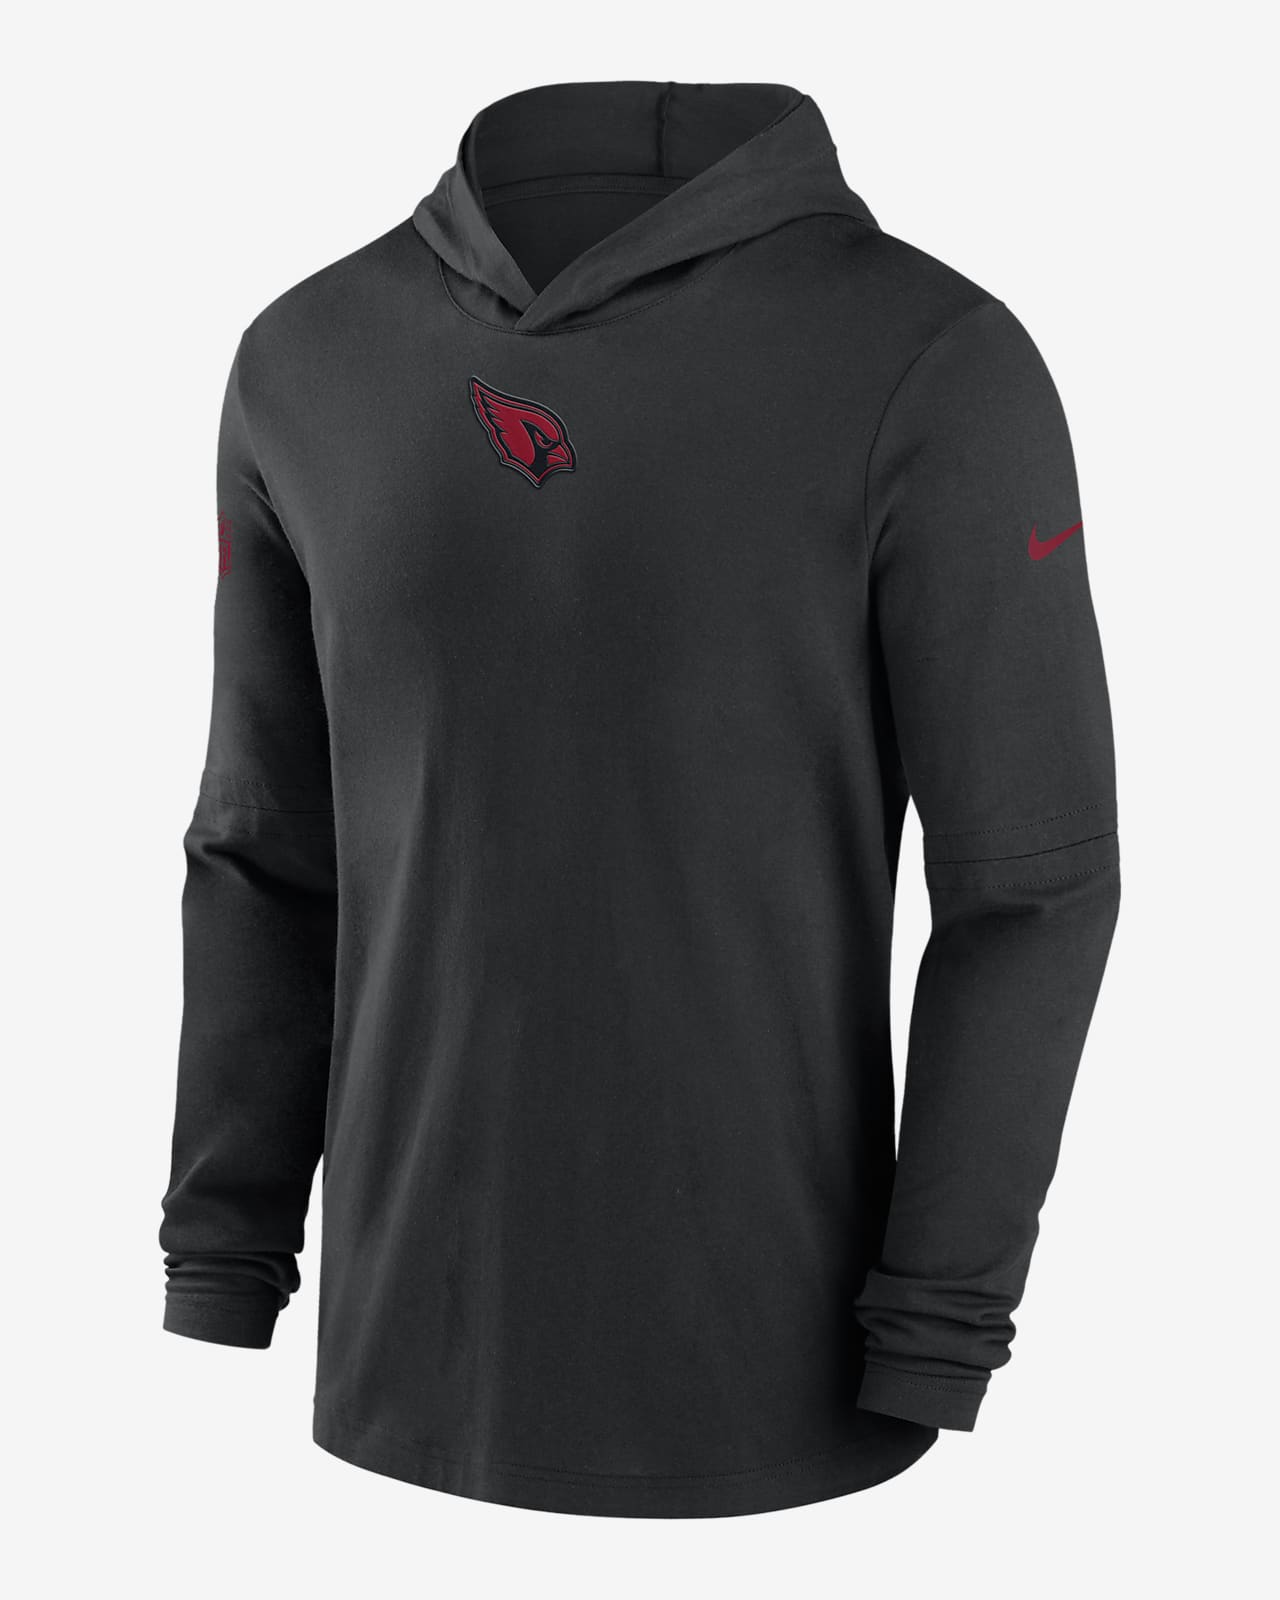 Arizona Cardinals Sideline Men’s Nike Men's Dri-Fit NFL Long-Sleeve Hooded Top in Black, Size: Small | 00MQ00A9C-PKB